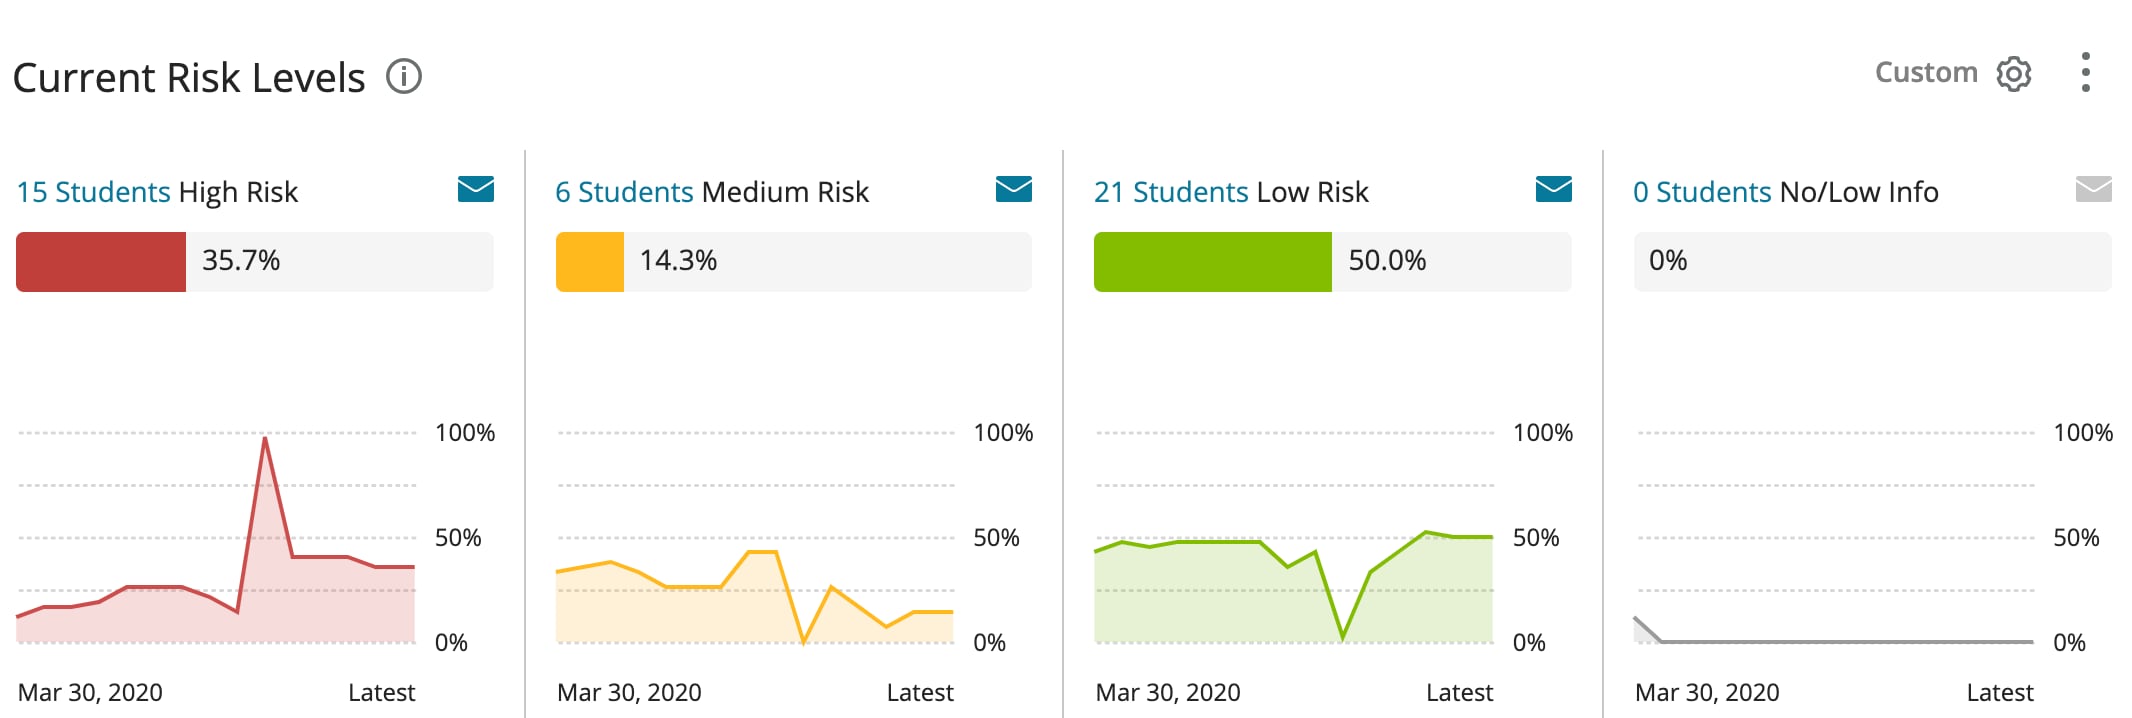 Early Alerts show risk levels for both the class and individual students.